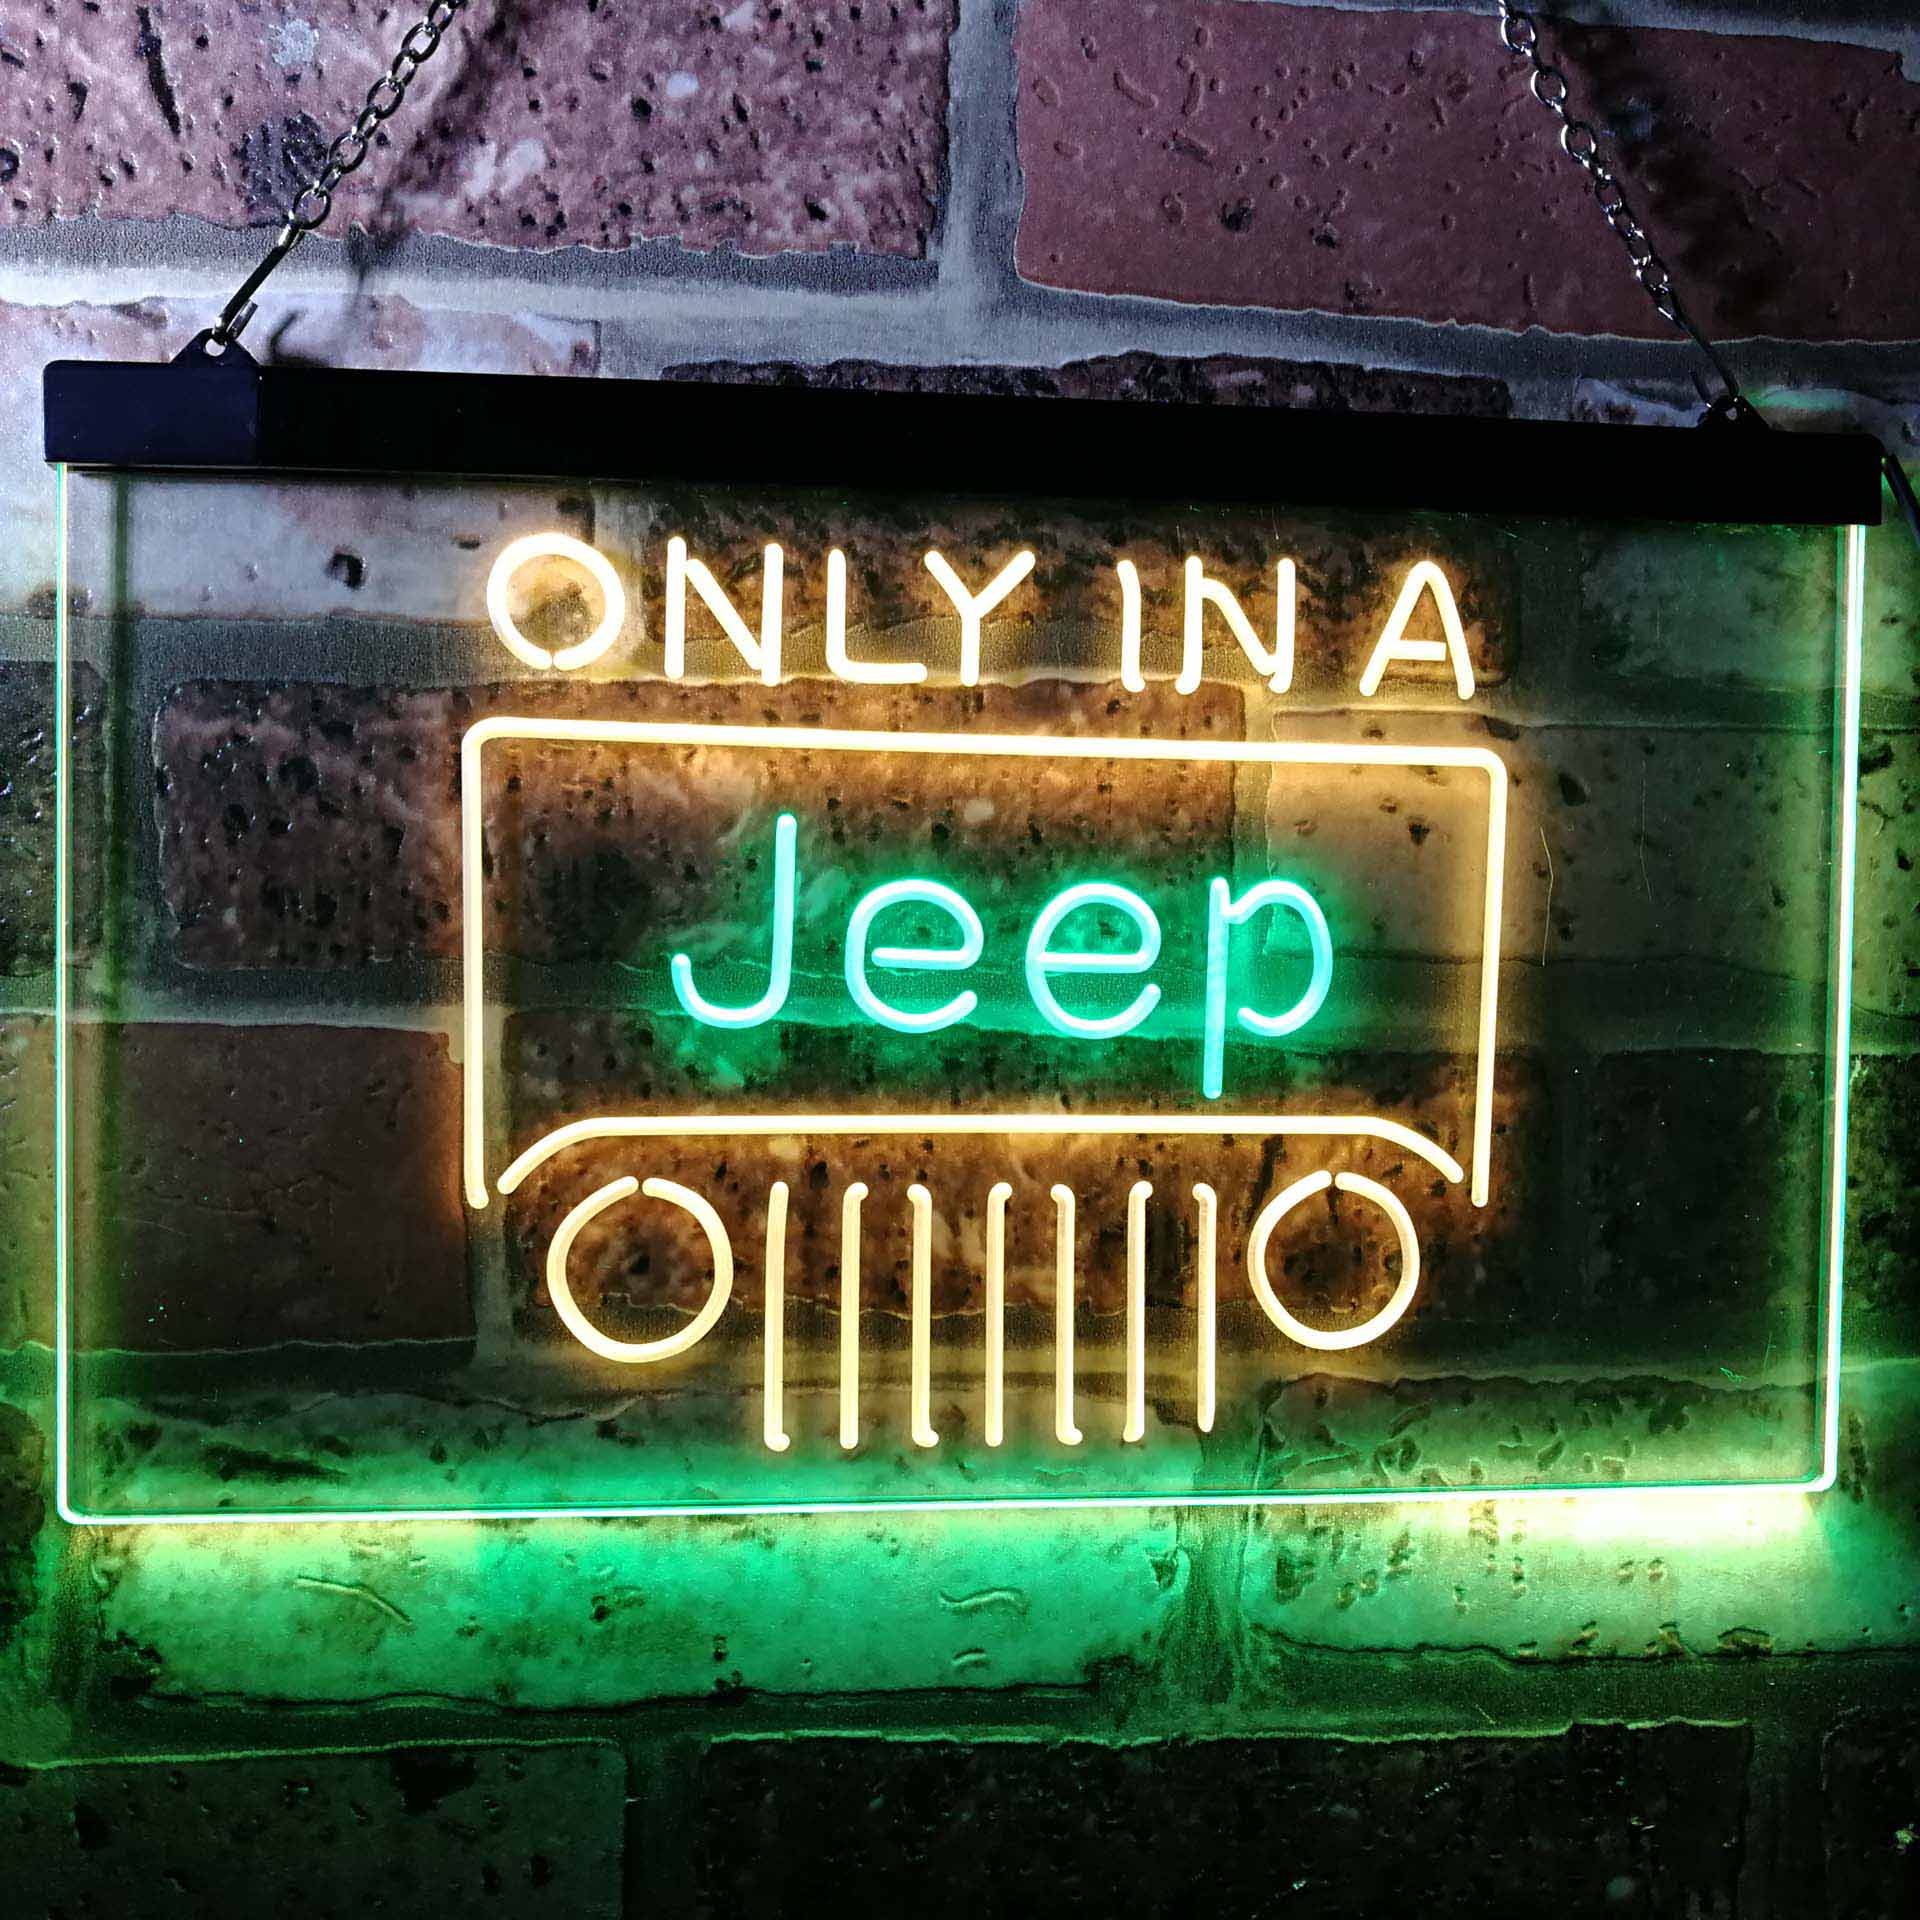 Only in a Jeep Beer Garage LED Neon Sign